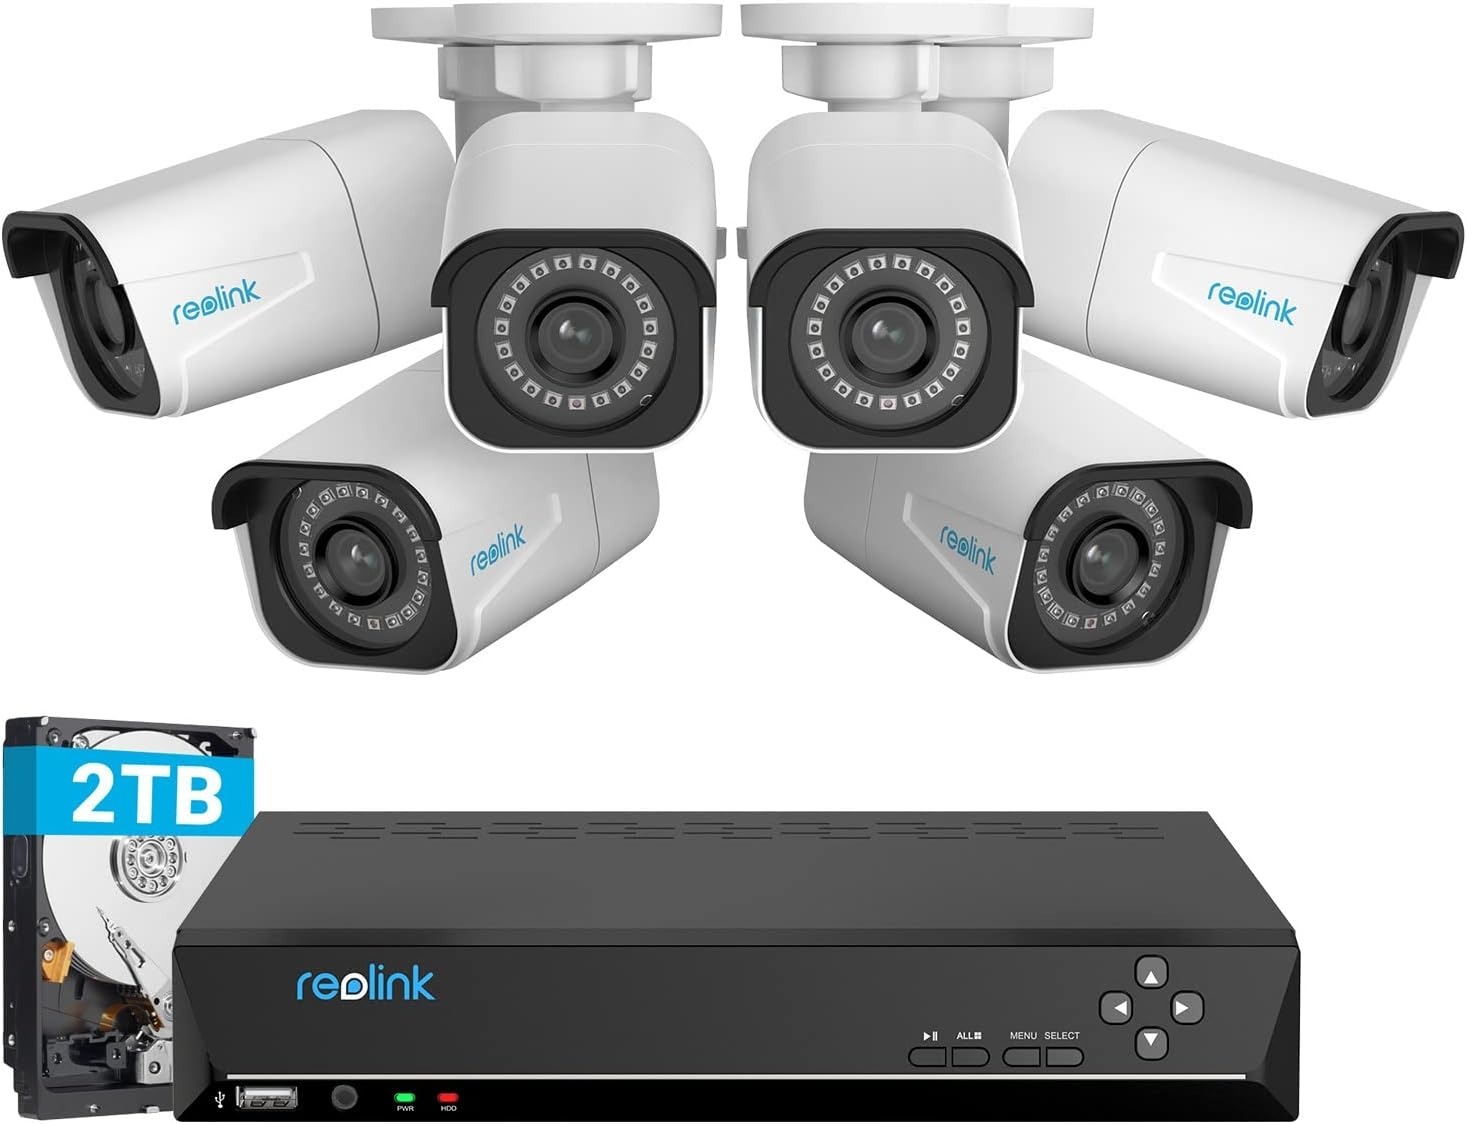 Reolink 4K 8CH PoE Security Camera System w/ 6 Bullet Cameras $525+ Free Shipping